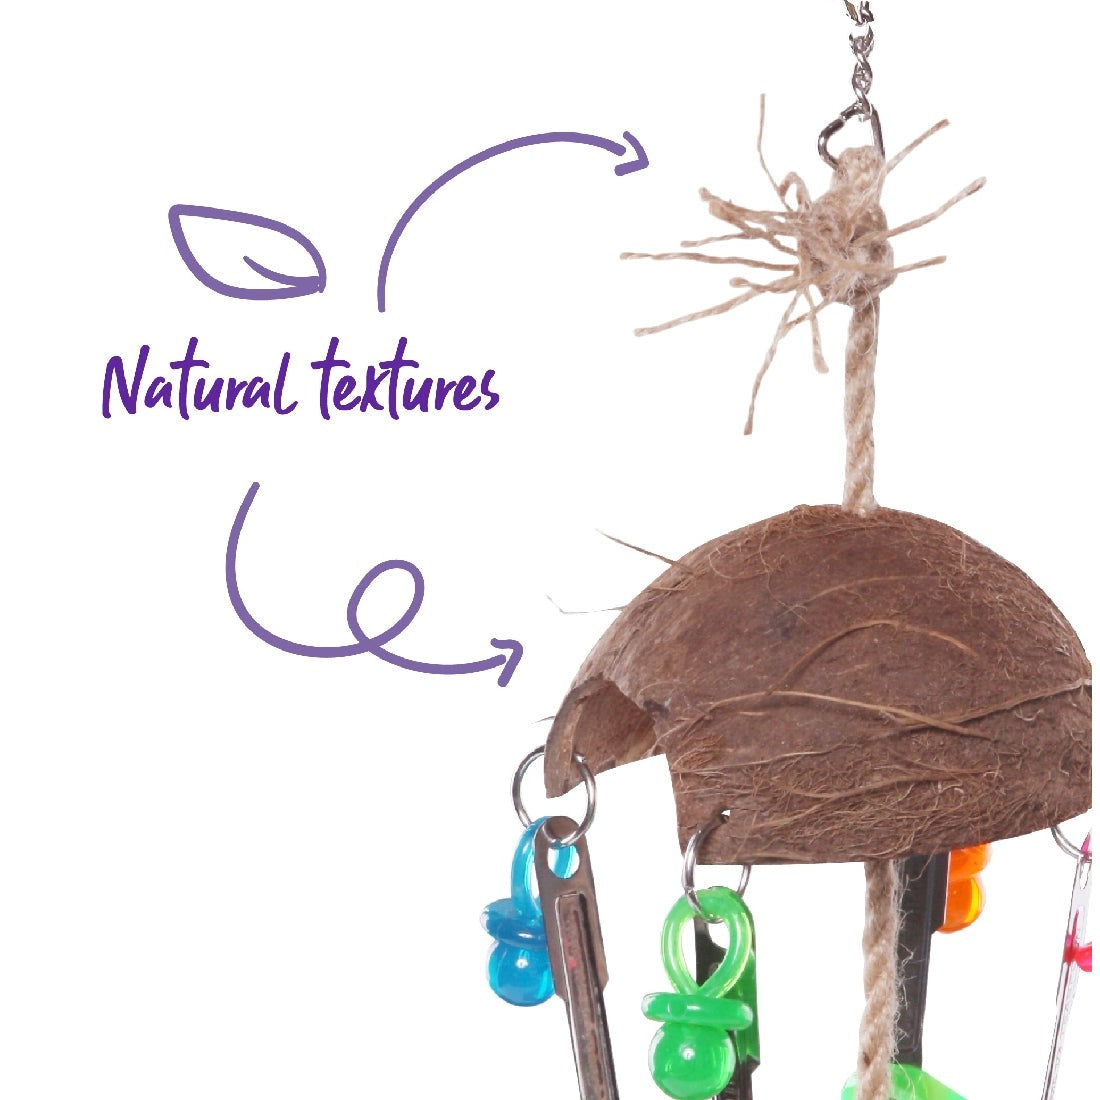 Alt text: Bird toy with coconut shell and colorful beads, labeled "Natural textures."